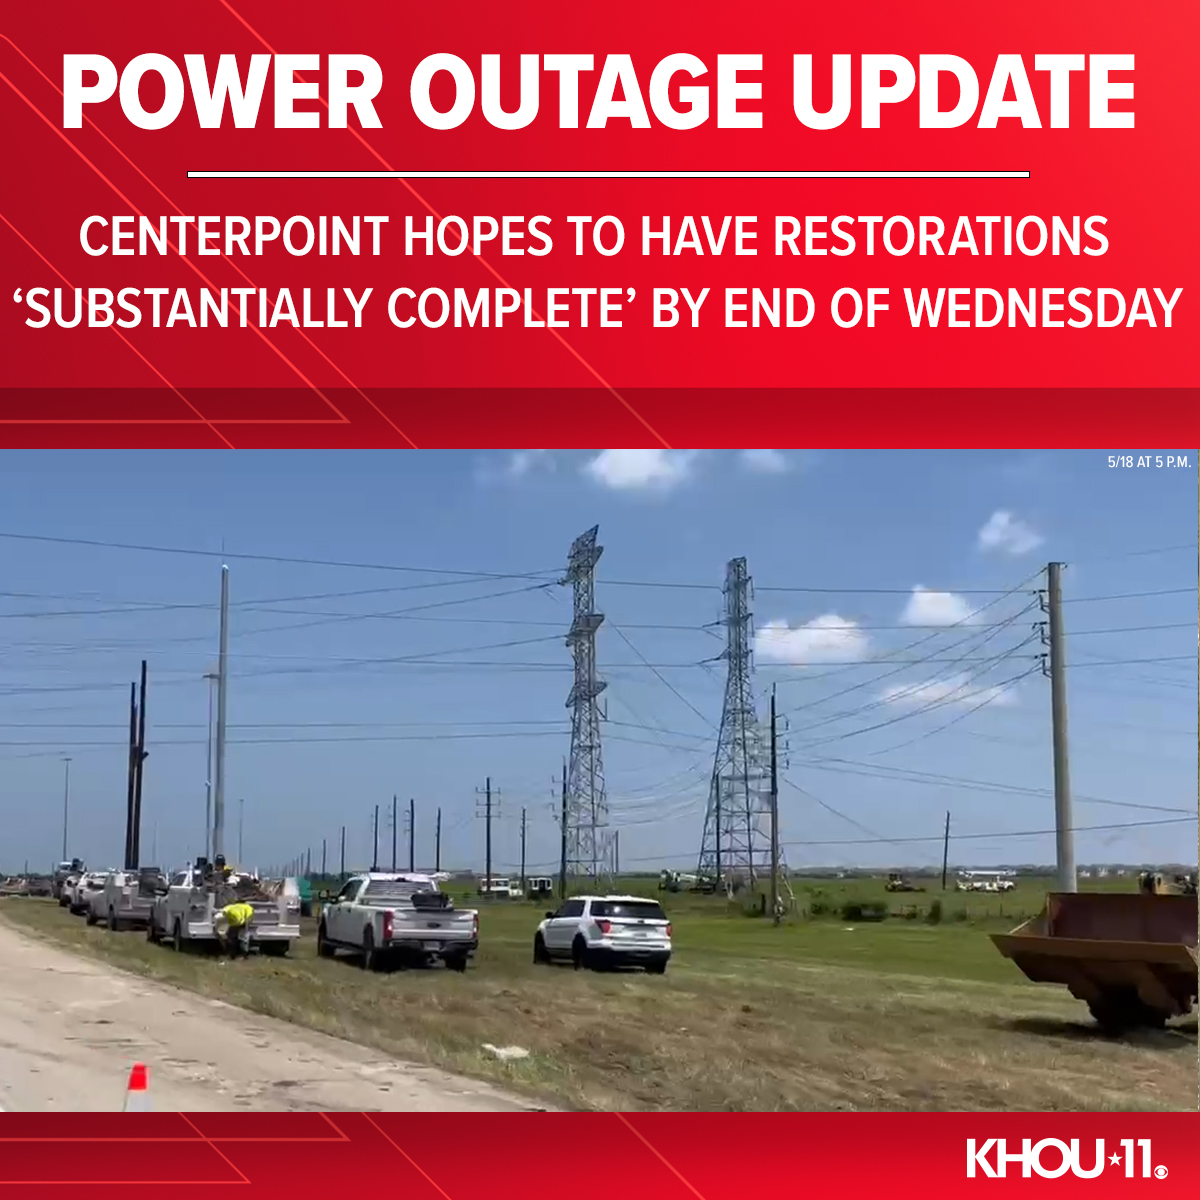 POWER OUTAGE UPDATE | CenterPoint gave an update on power outages today. Their hope is to have restoration efforts 'signficantly complete' by the end of Wednesday. Full story: khou.com/article/weathe…